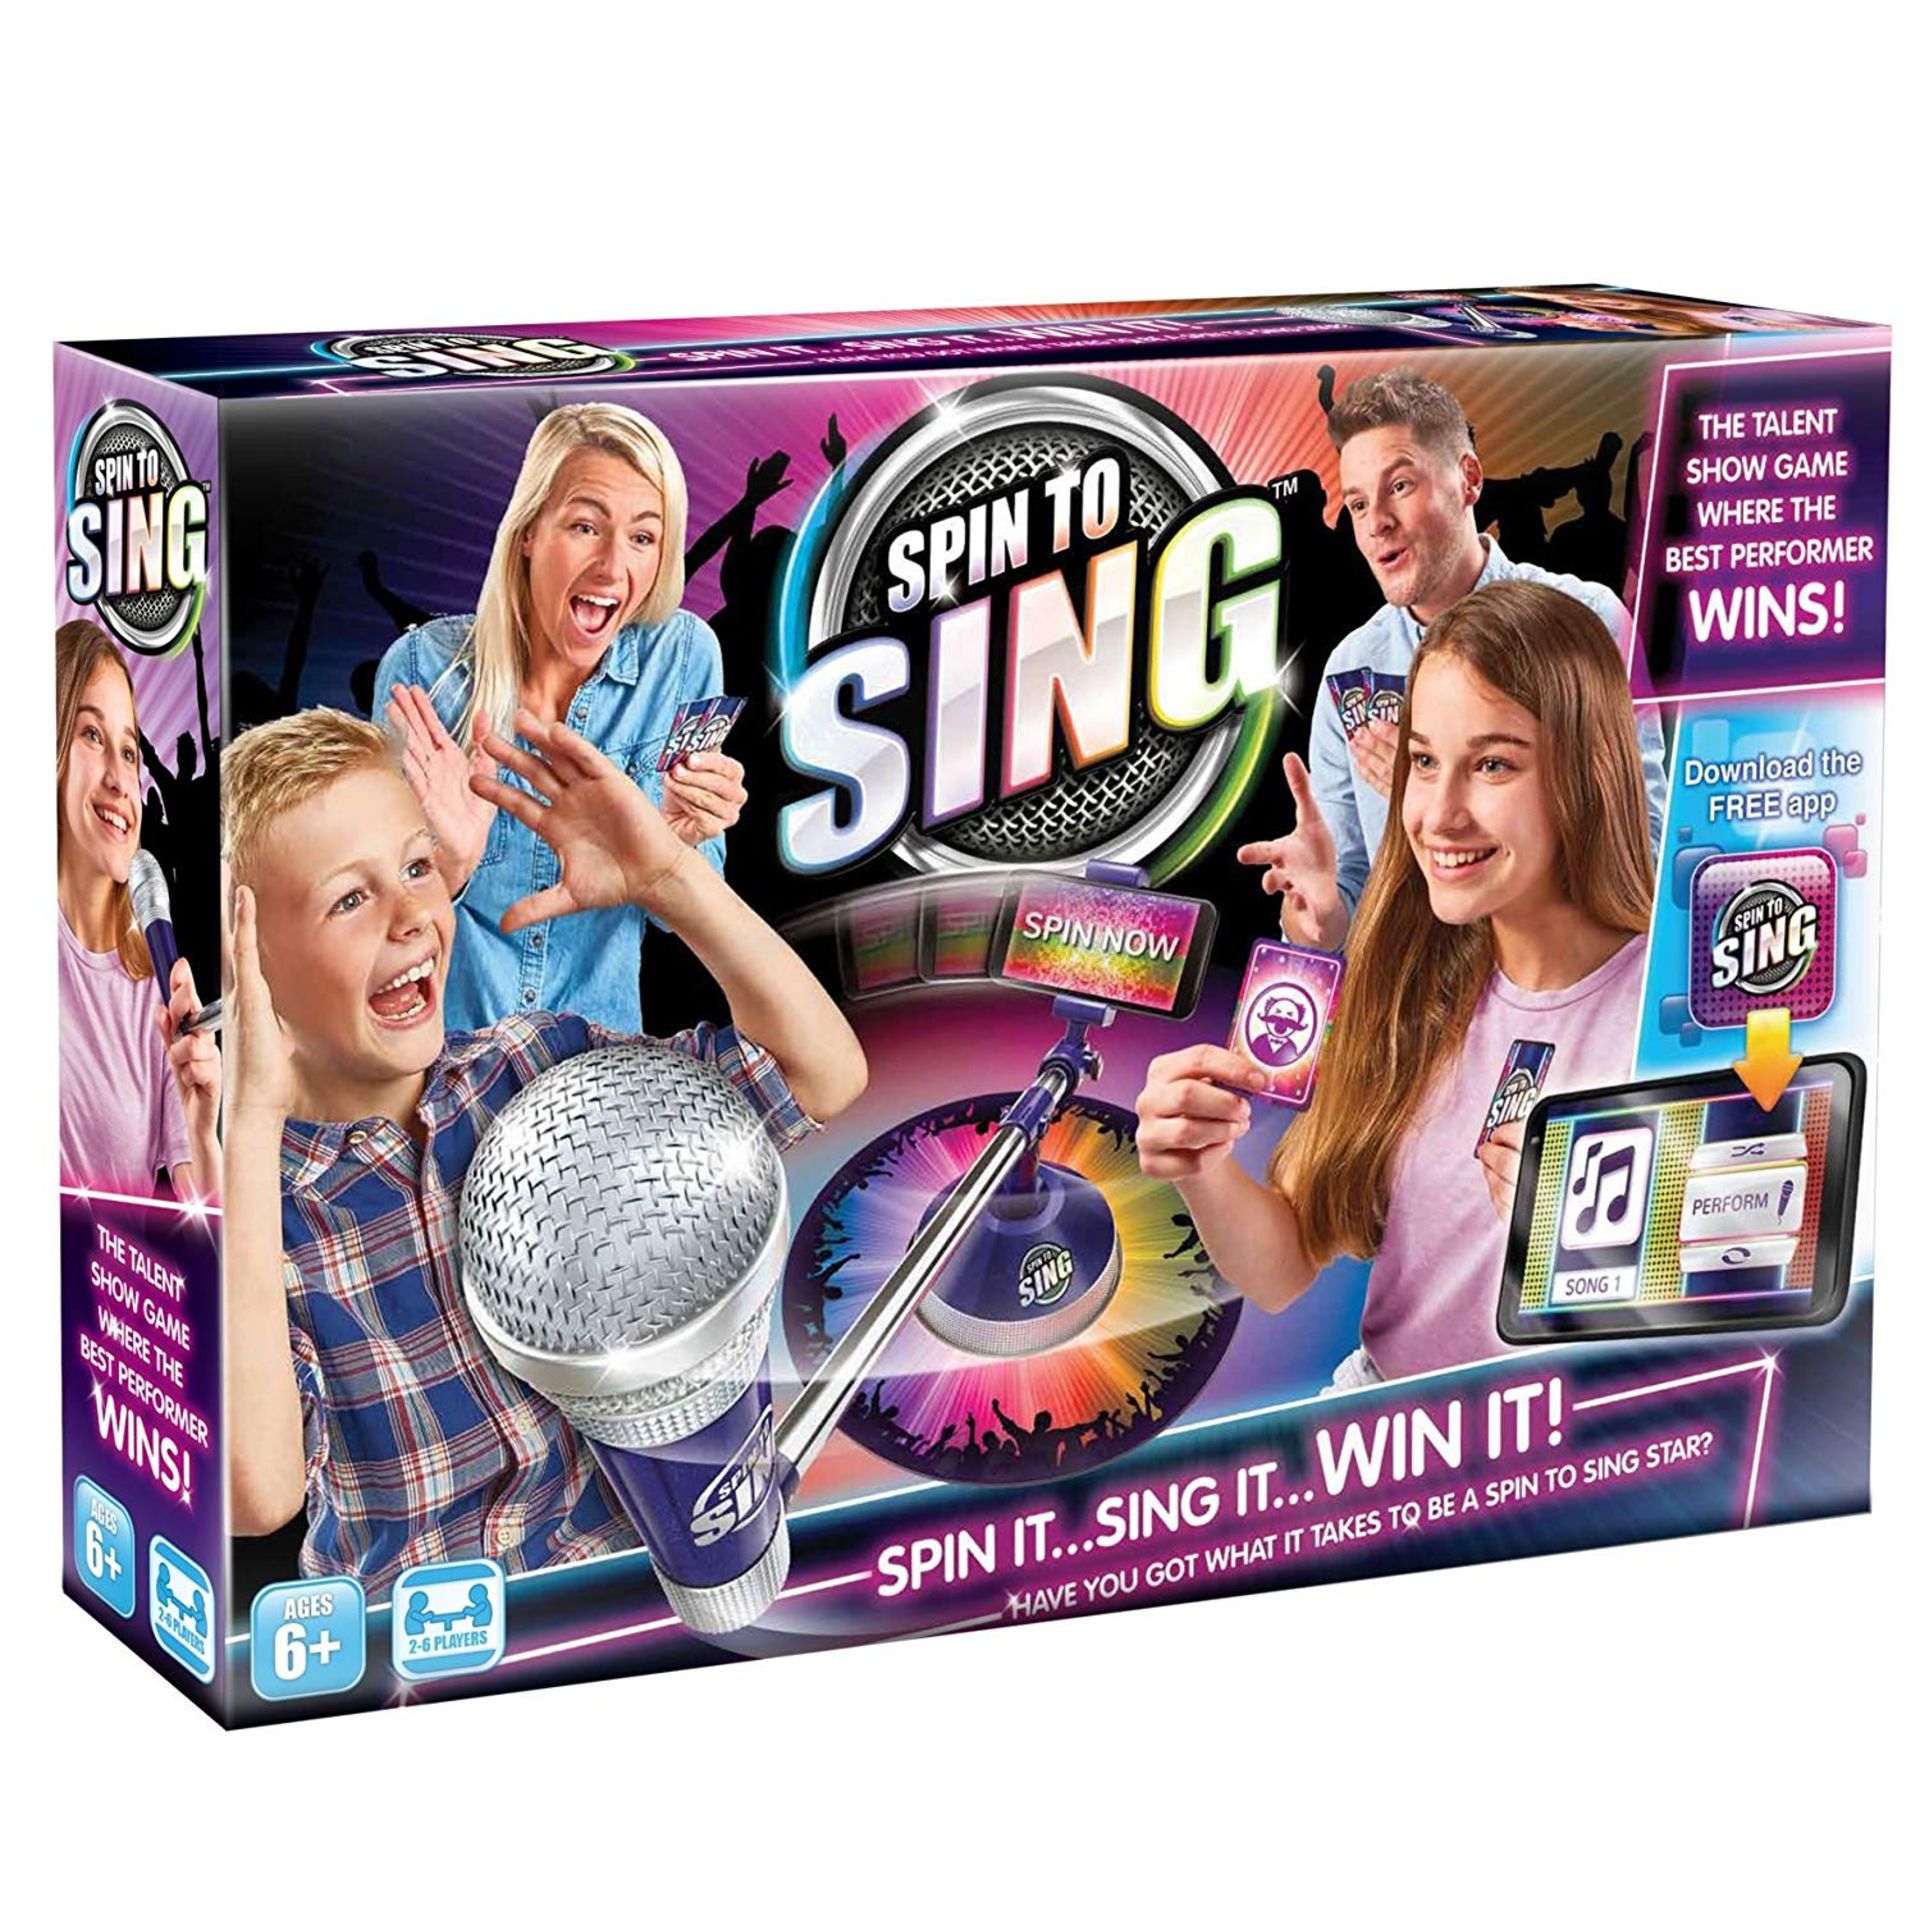 160 x Spin to Sing Board Game Singing Competition For All The Family Children Gift Fun | @ RRP £14.9